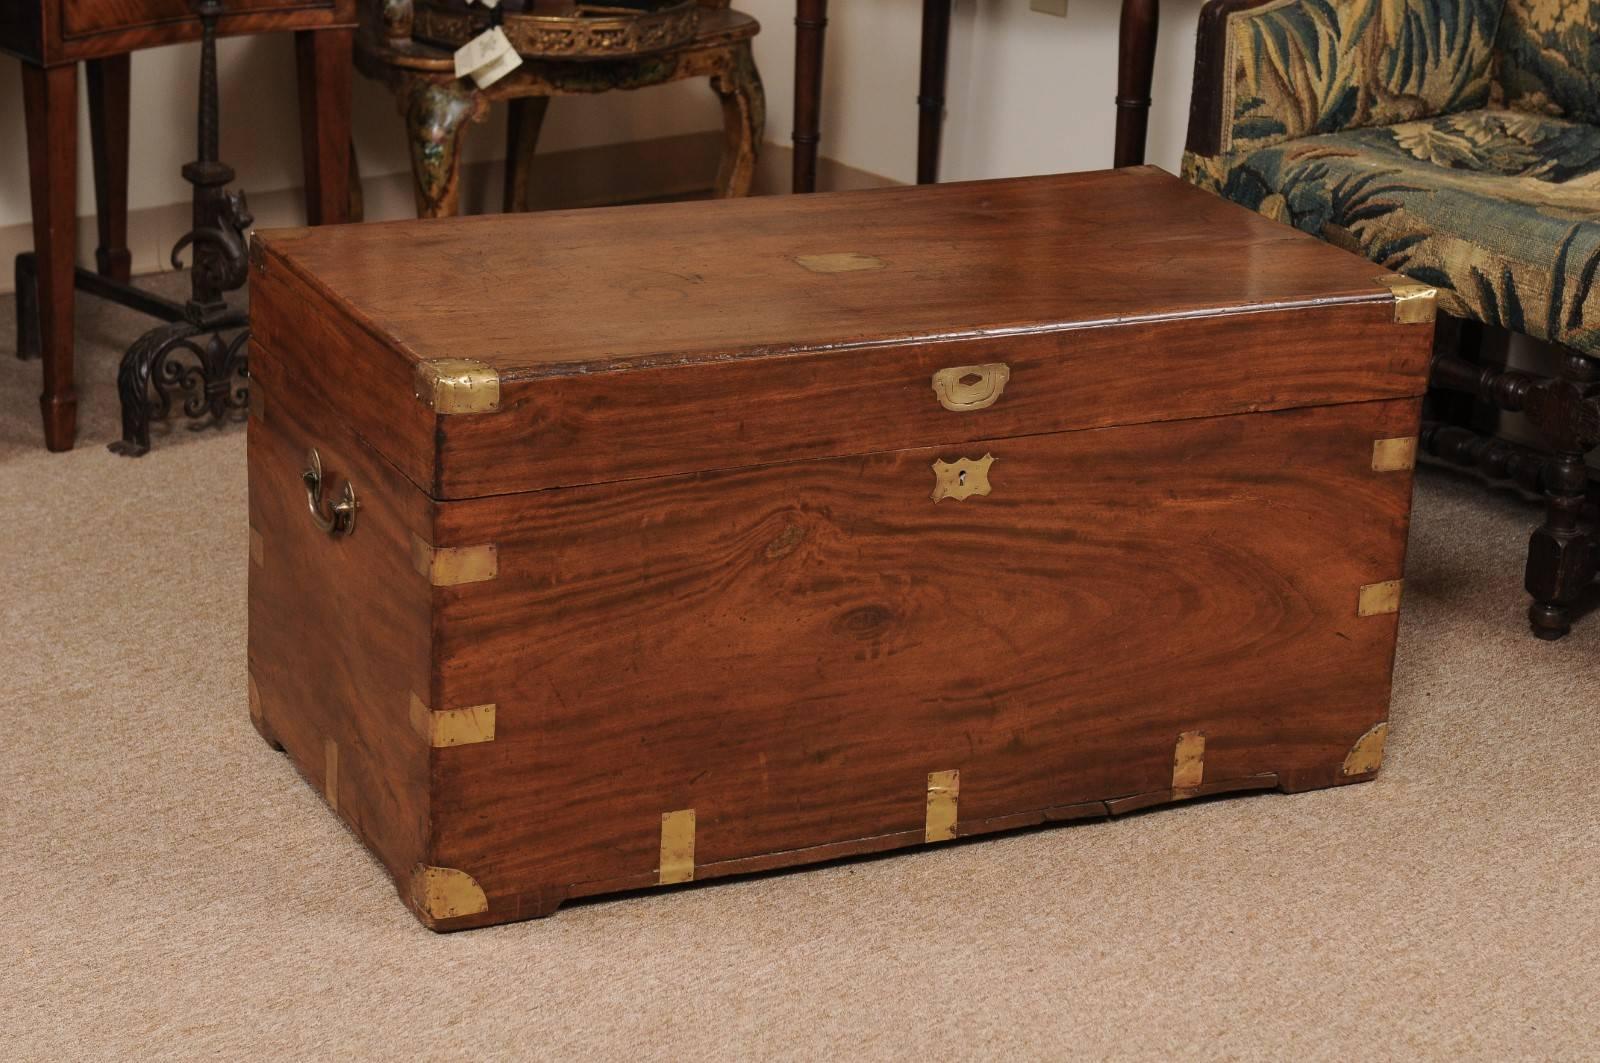 19th Century English Mahogany Trunk with Brass Mounts and Handles 1